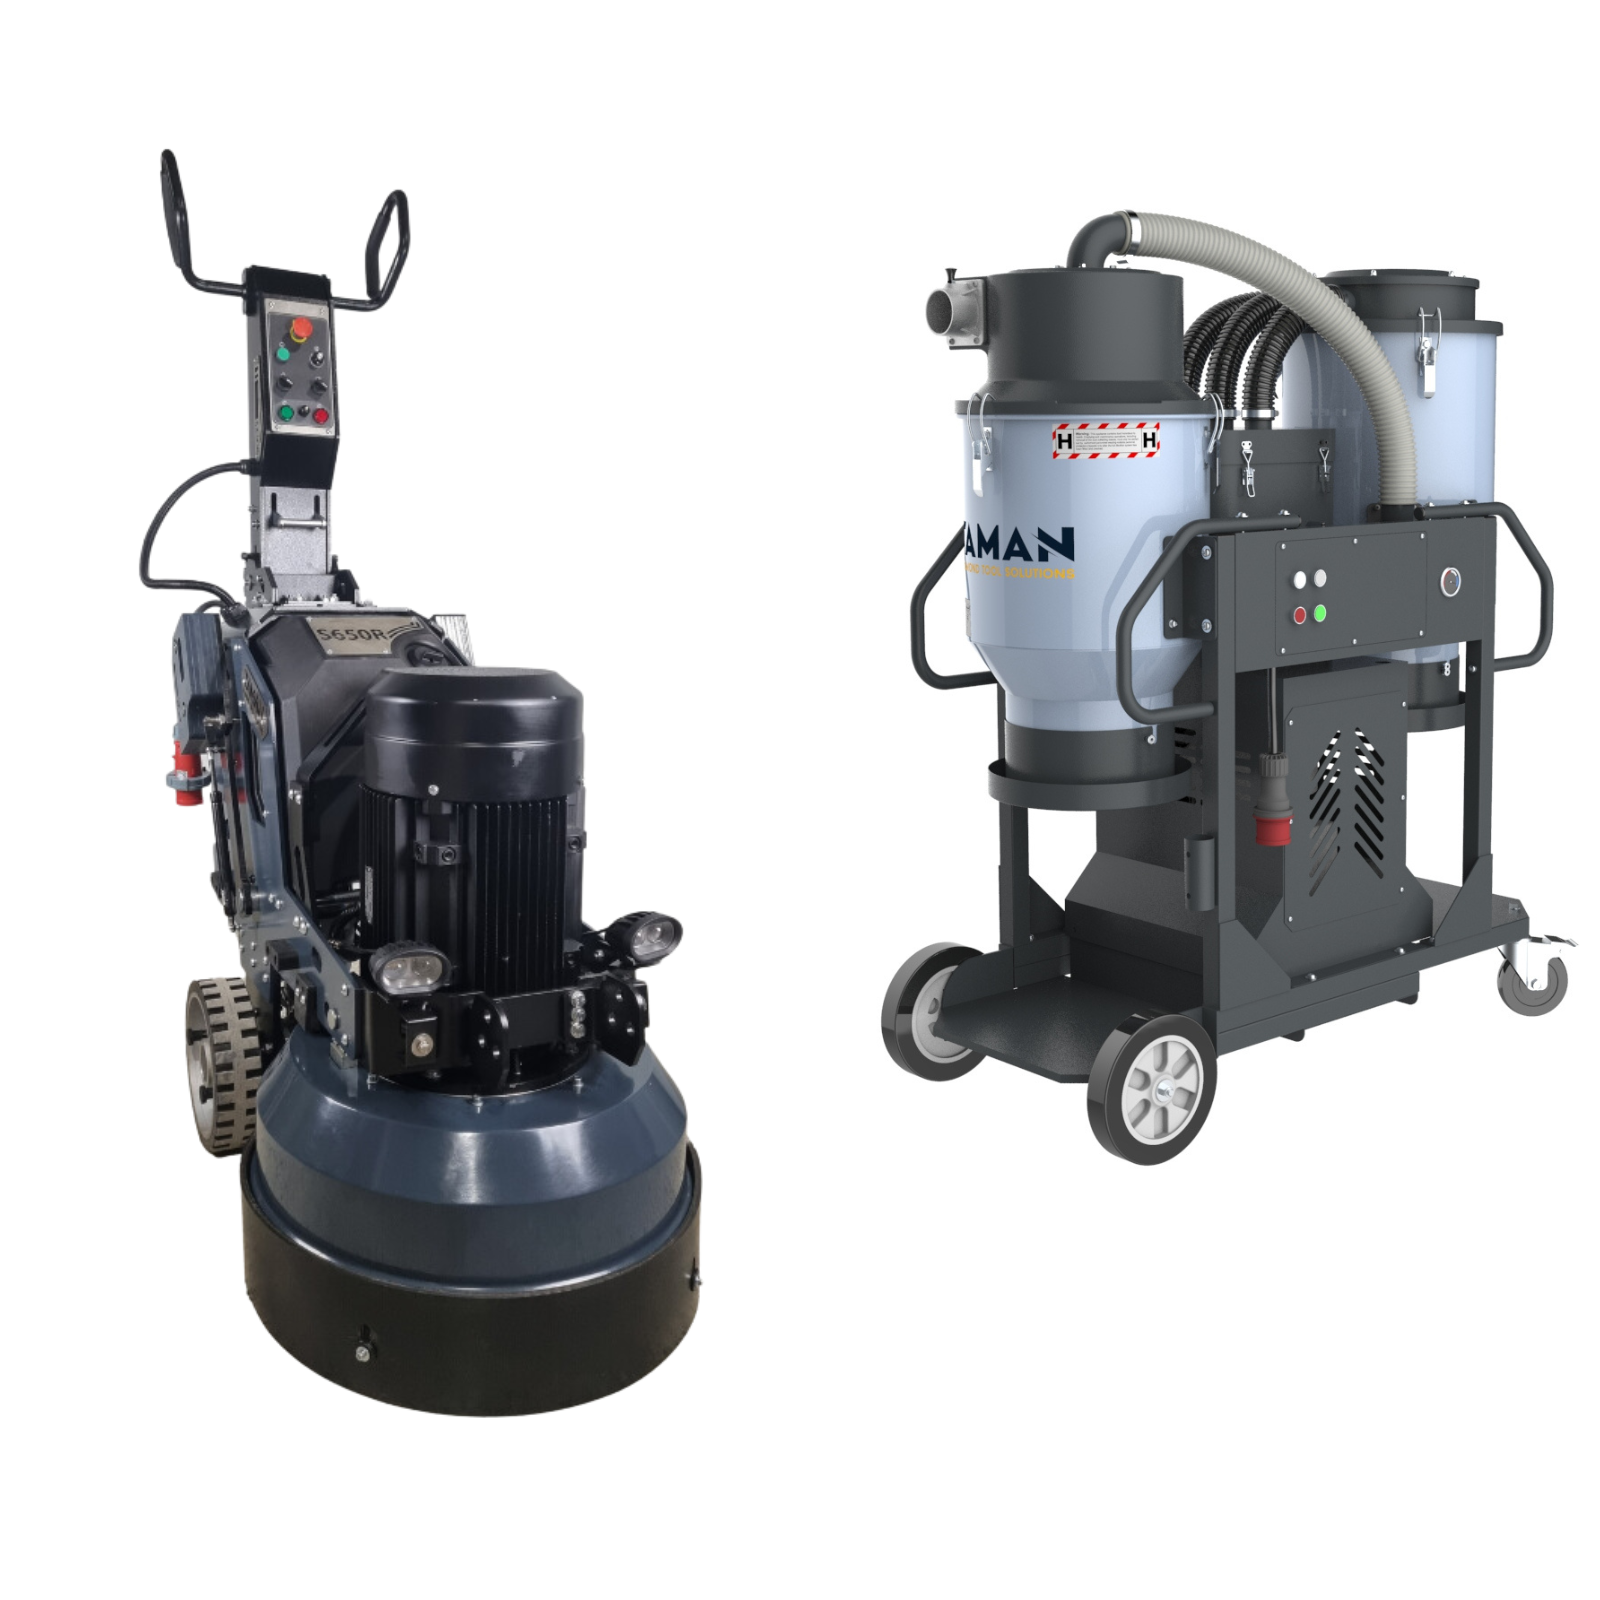 3 Phase Concrete Grinders for Hire in Perth